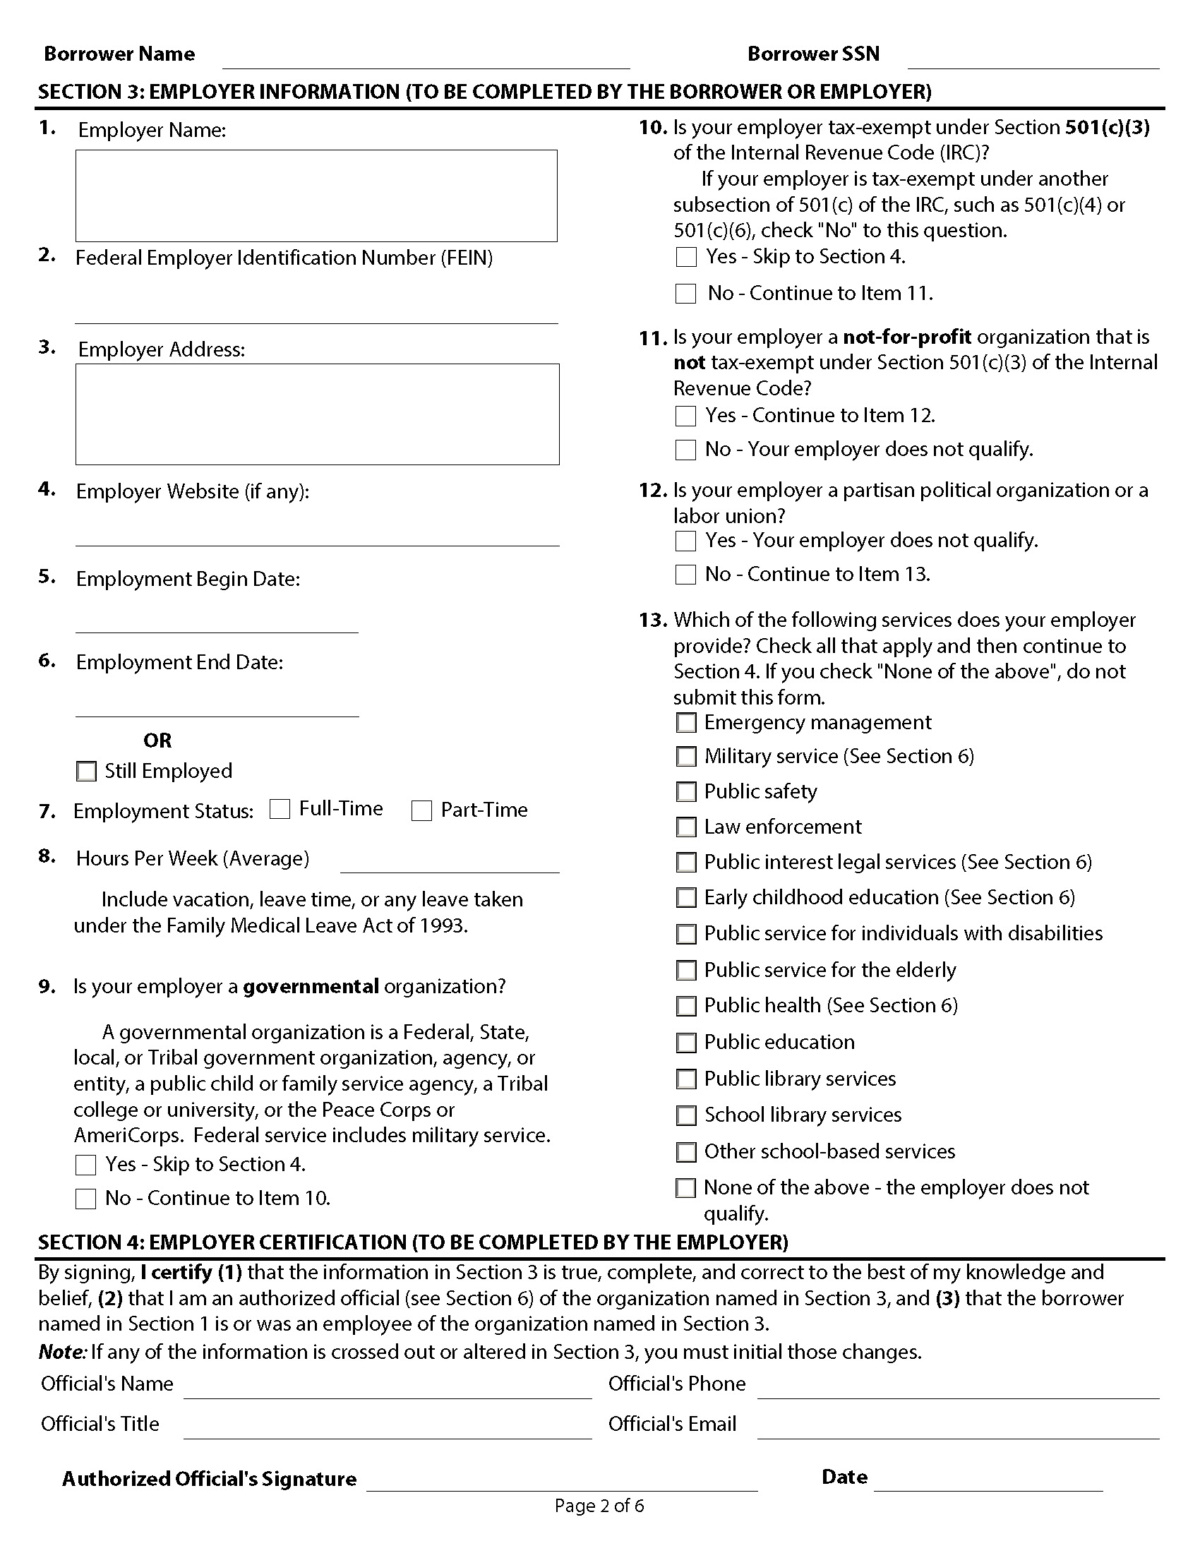 PSLF Submit Form